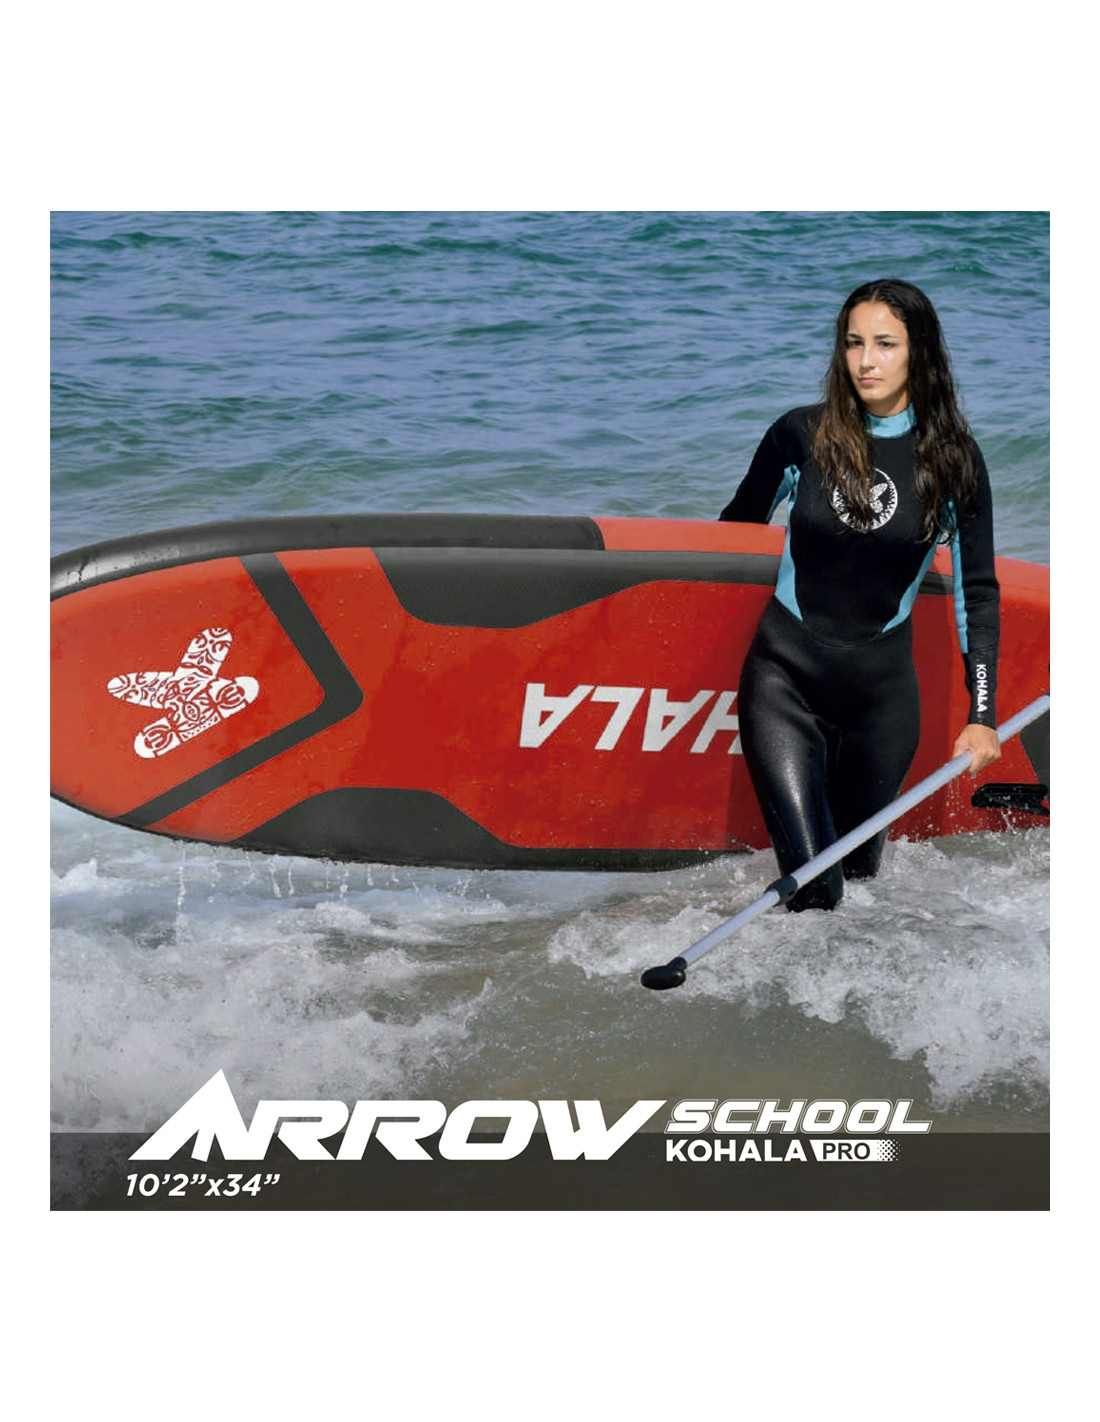 Stand Up Paddle Gonflable kohala 10'2 Arrow School pack